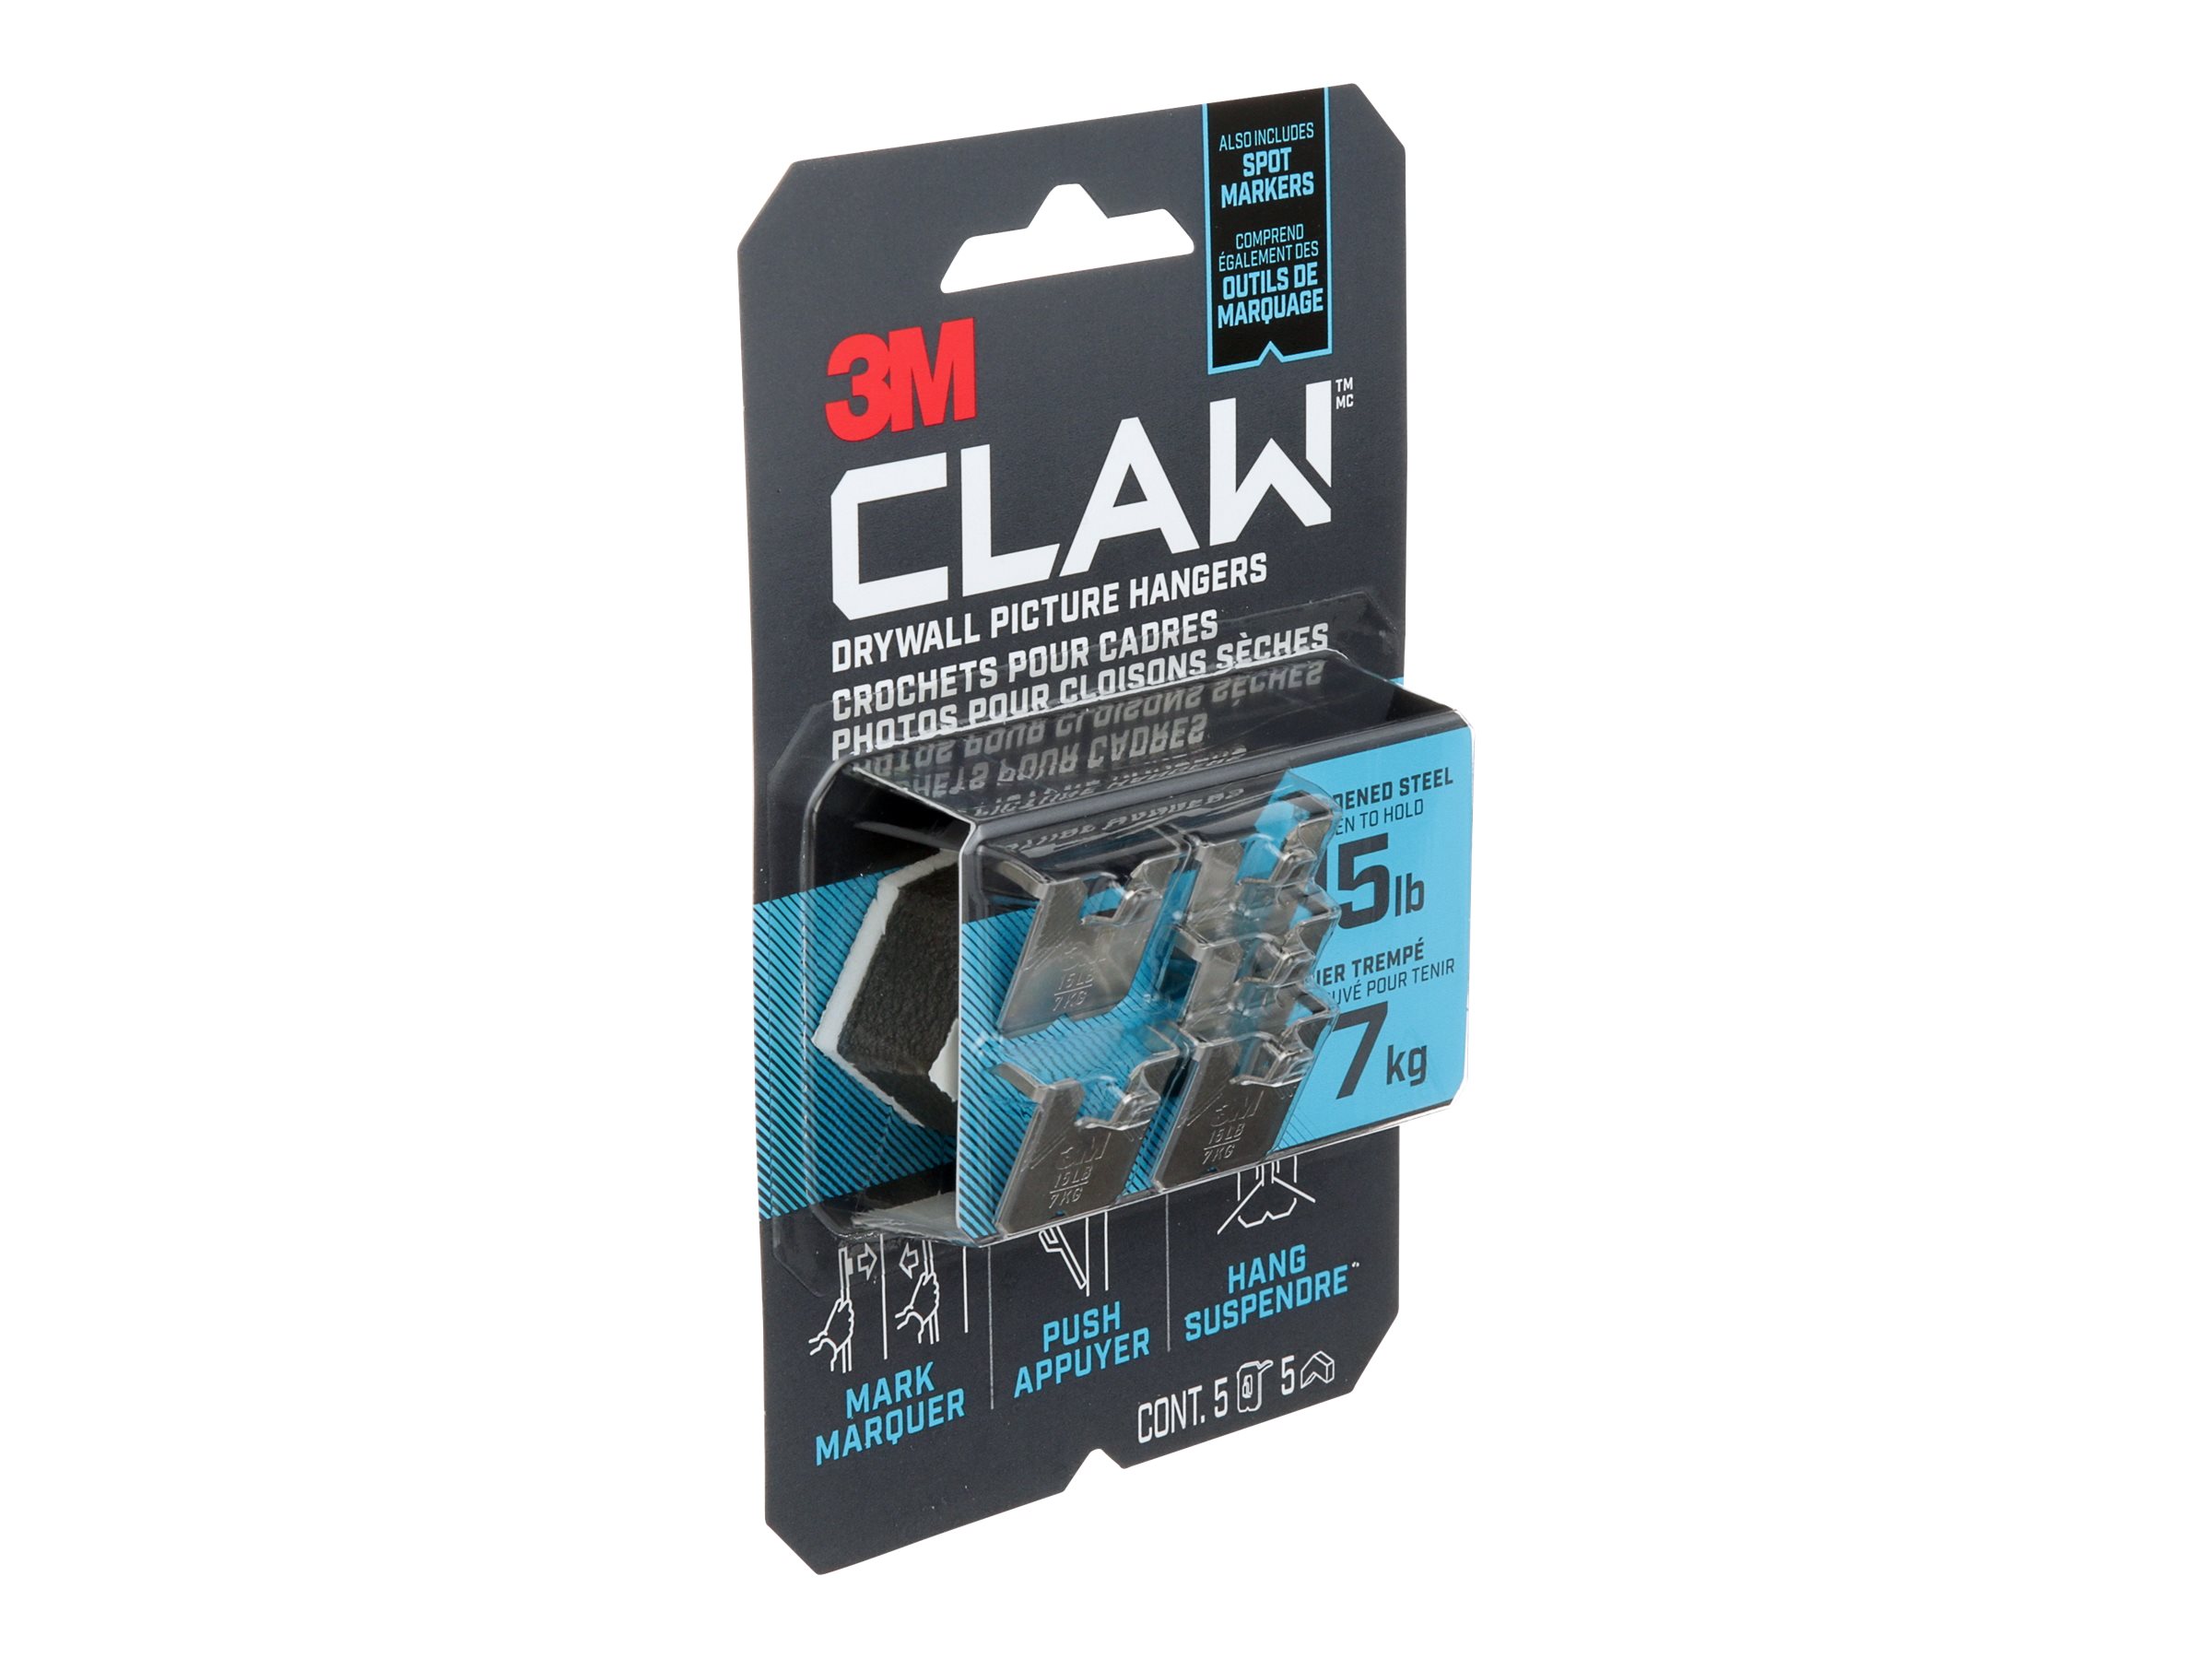 3M CLAW PICTURE HANGER 3PH15M-5EF